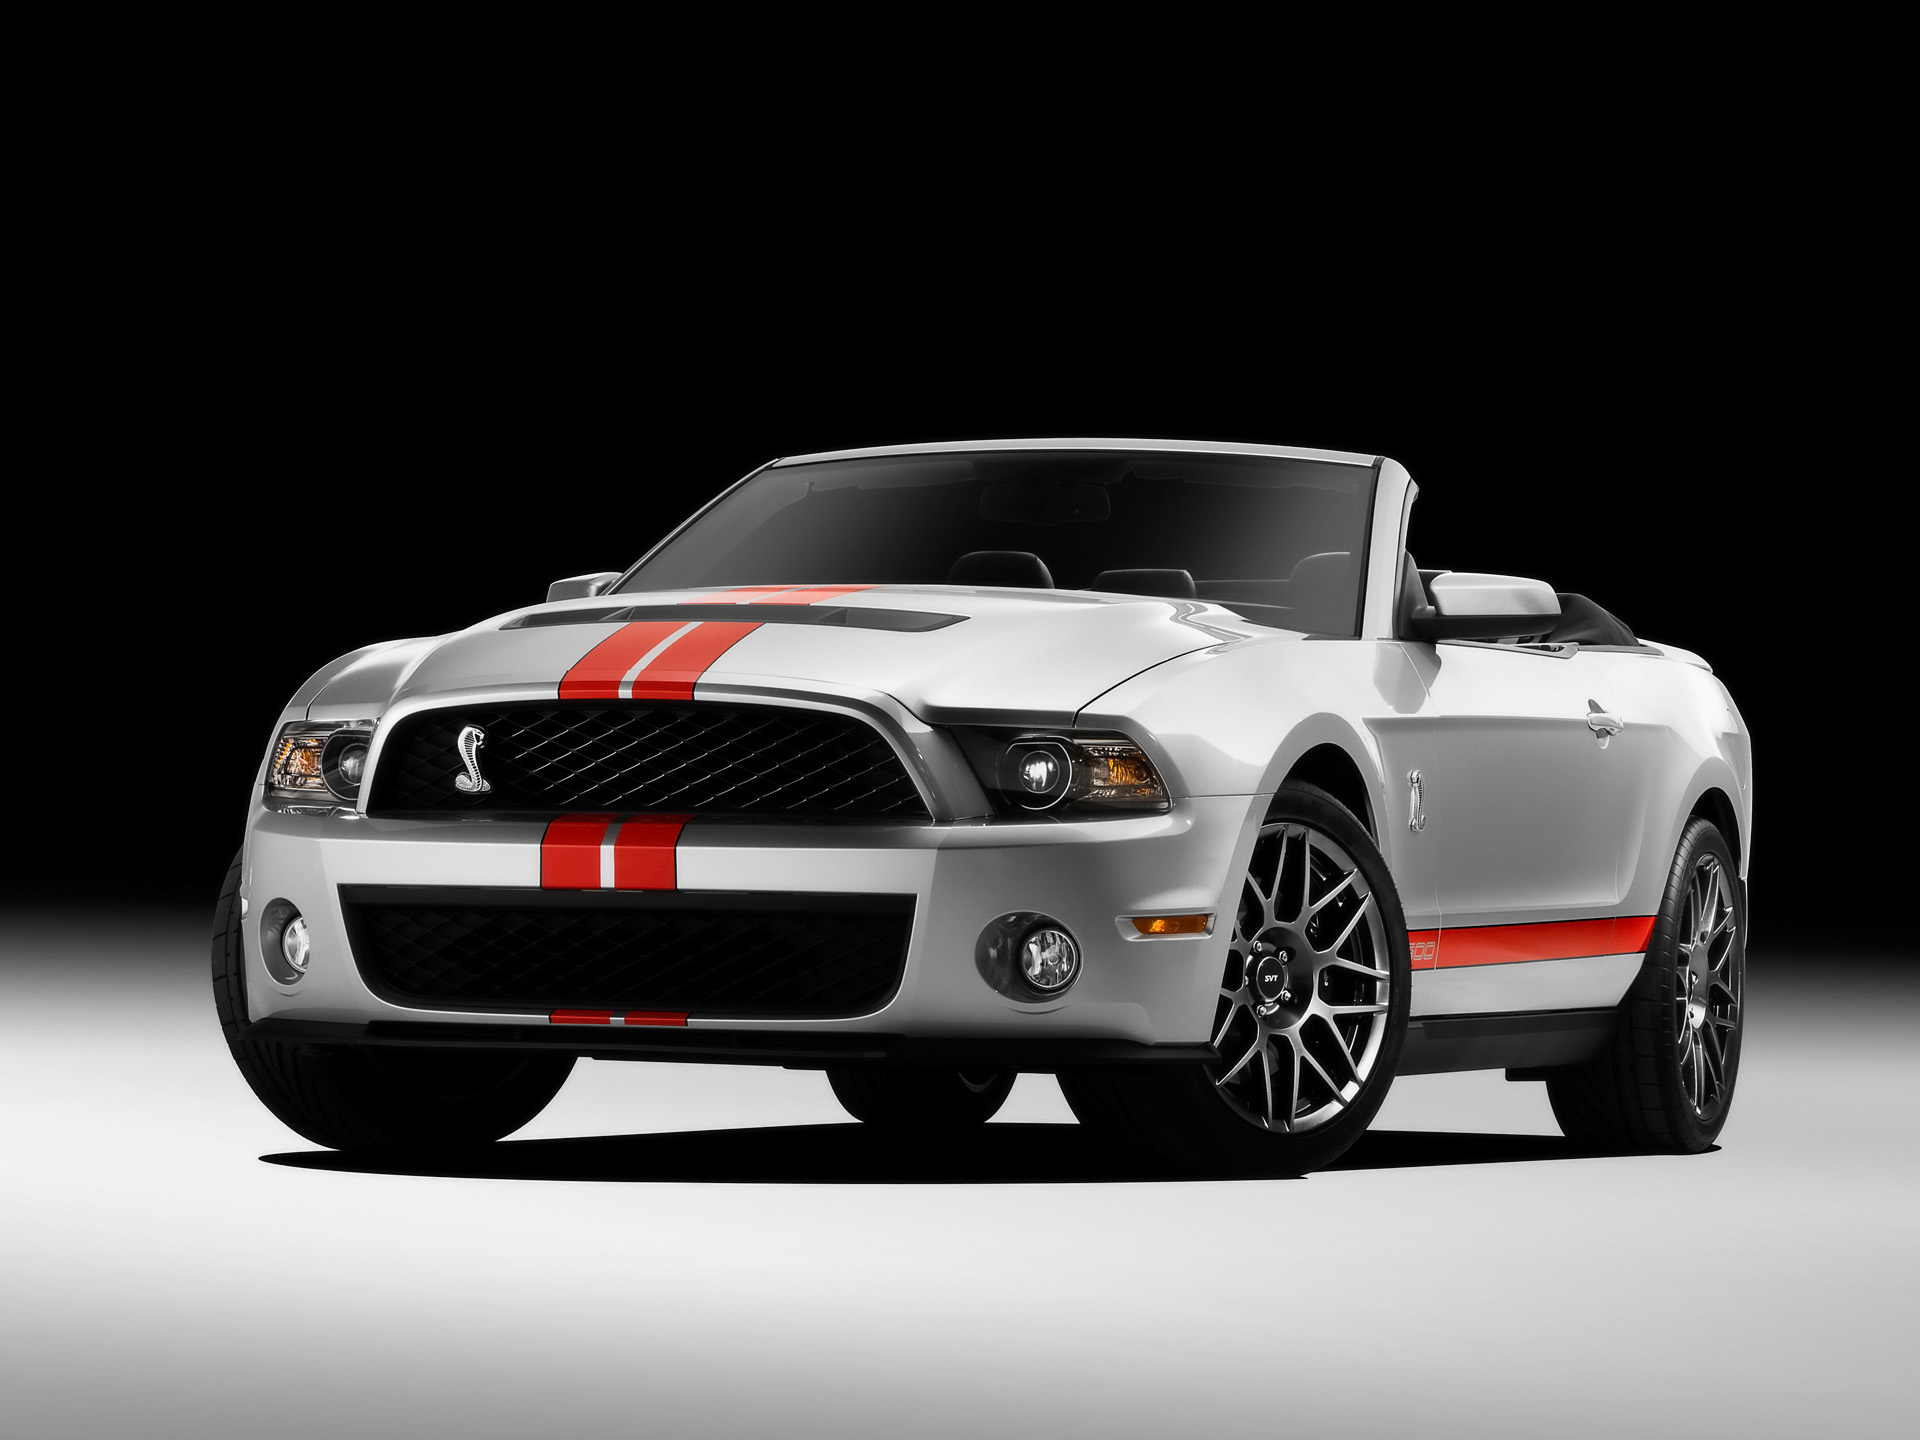 2010 Ford Mustang Shelby GT500 Wallpapers 